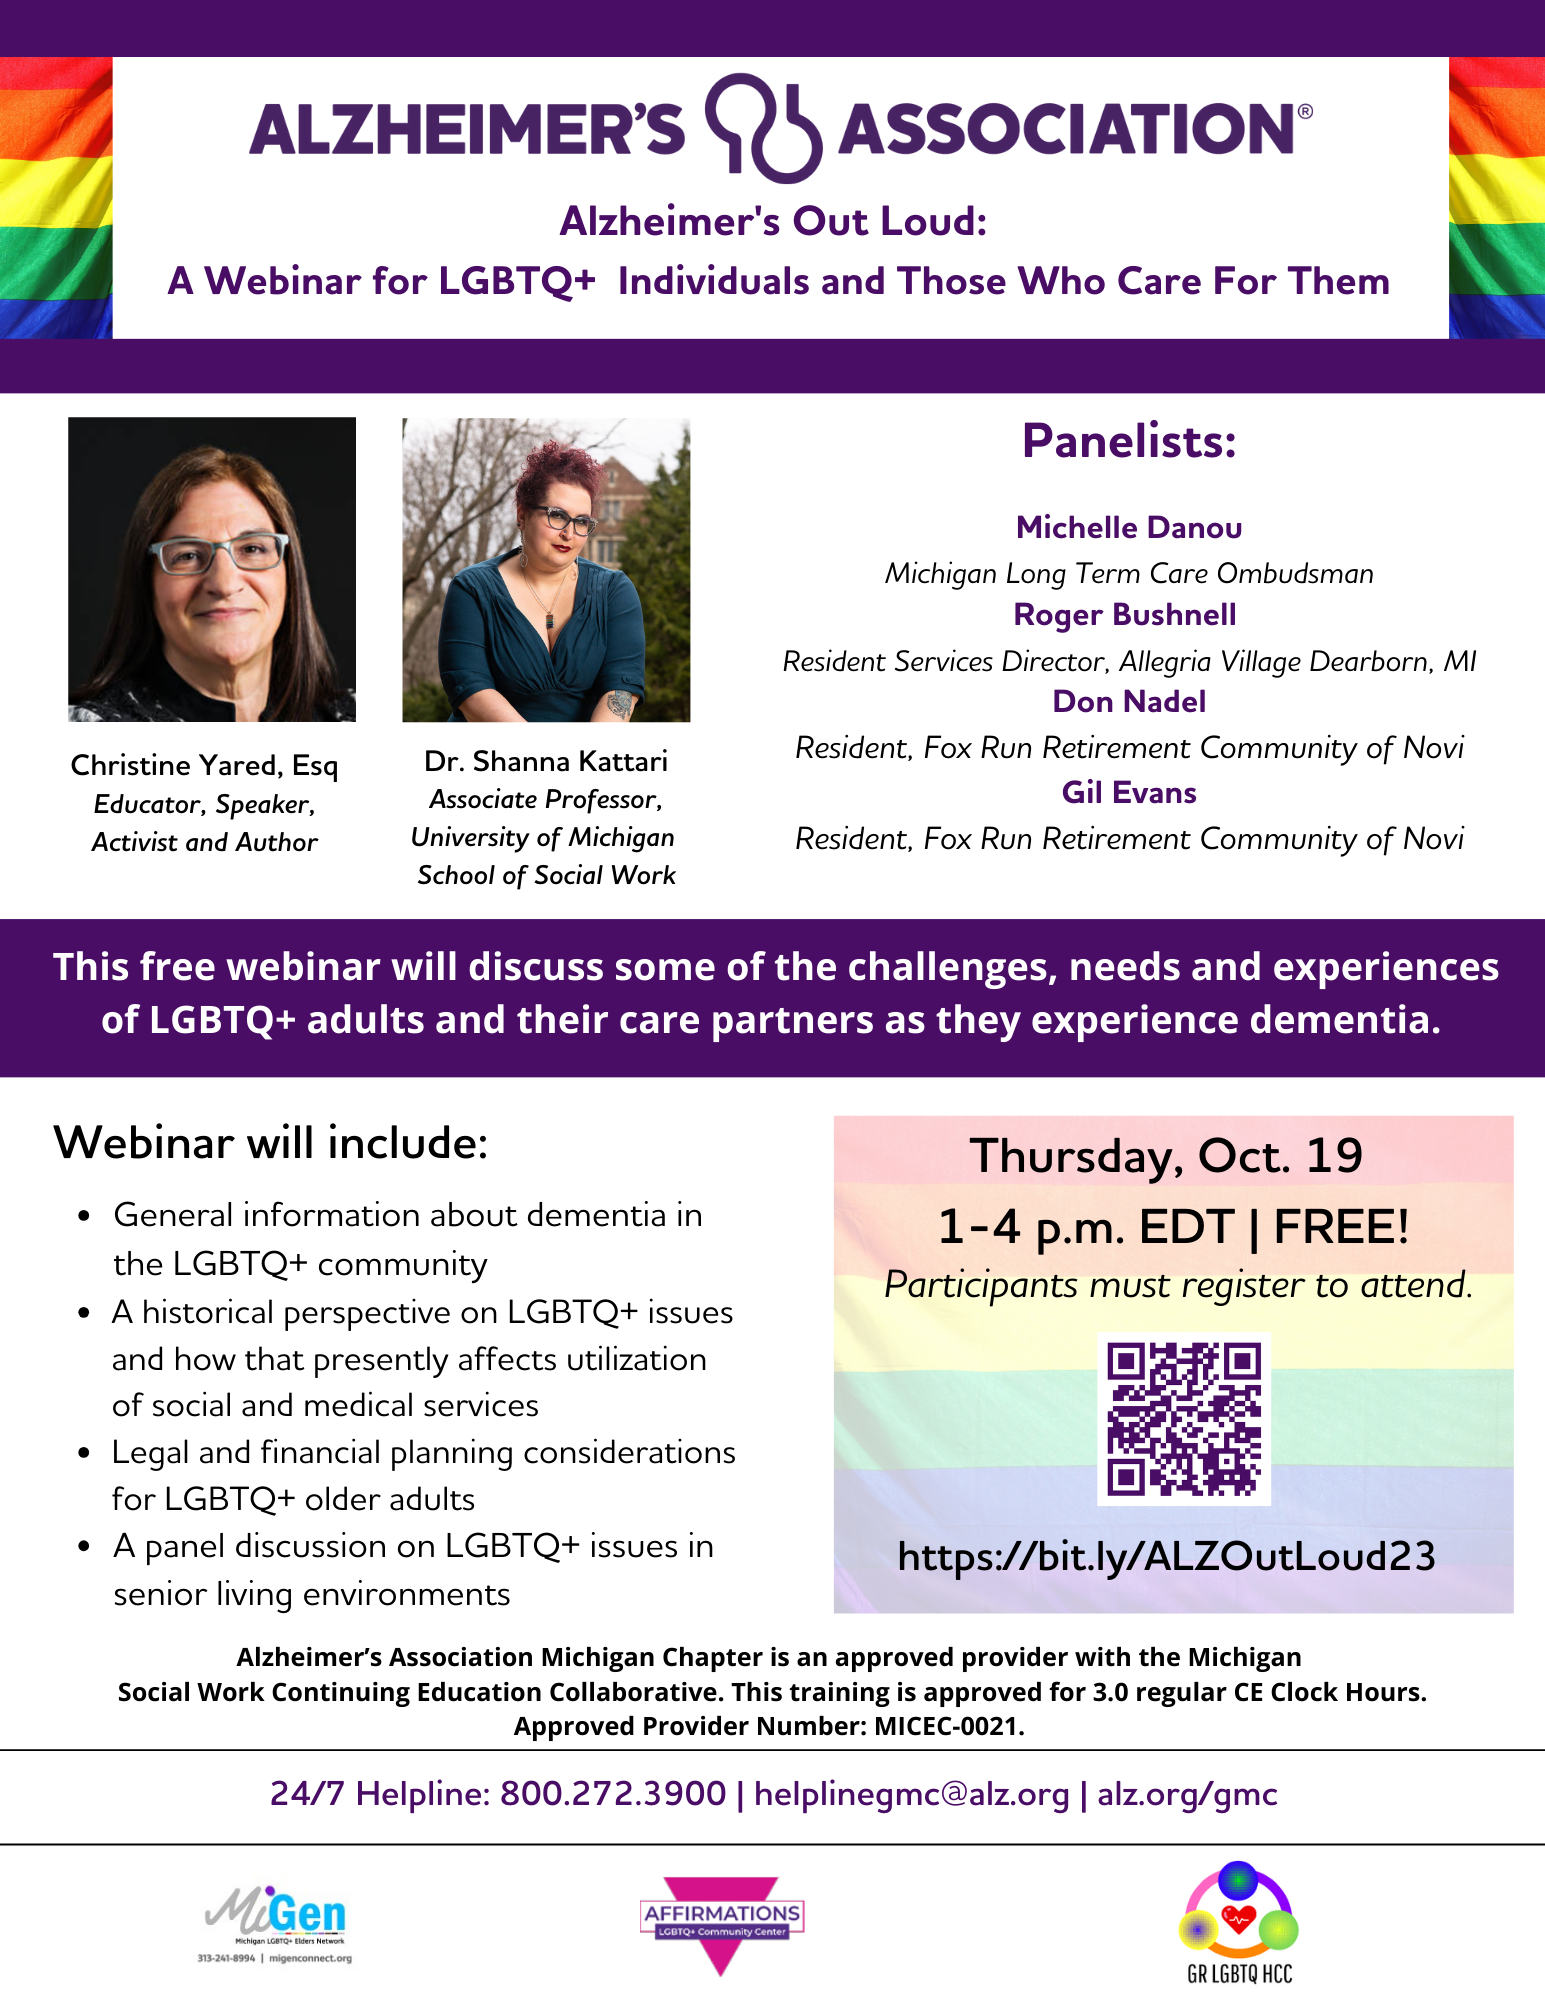 Alzheimer's Out Loud: A Webinar for LGBTQ+ Individuals and Those Who Care For Them